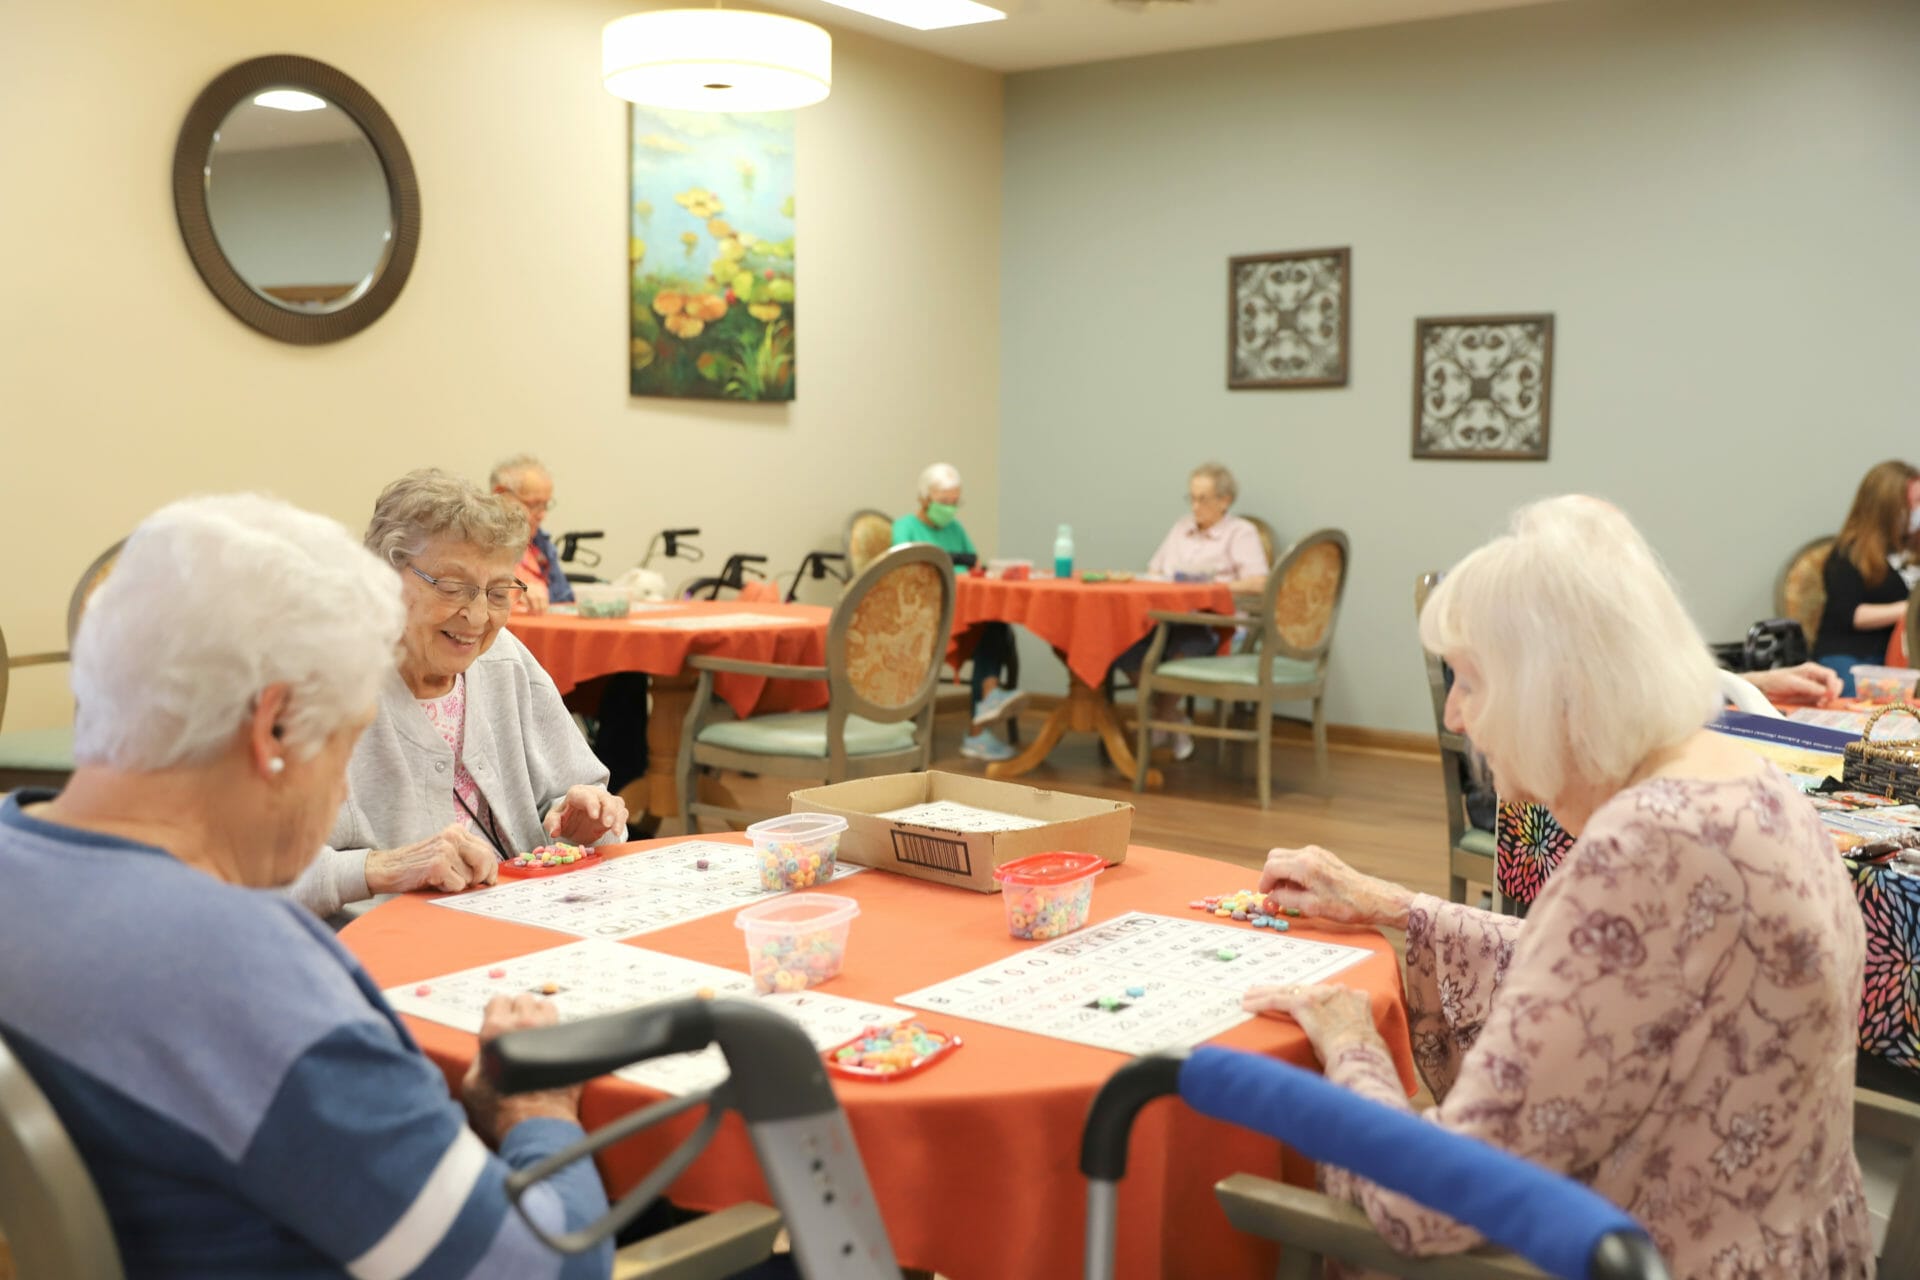 <span  class="uc_style_uc_tiles_grid_image_elementor_uc_items_attribute_title" style="color:#000000;">Respite care residents playing bingo together. </span>